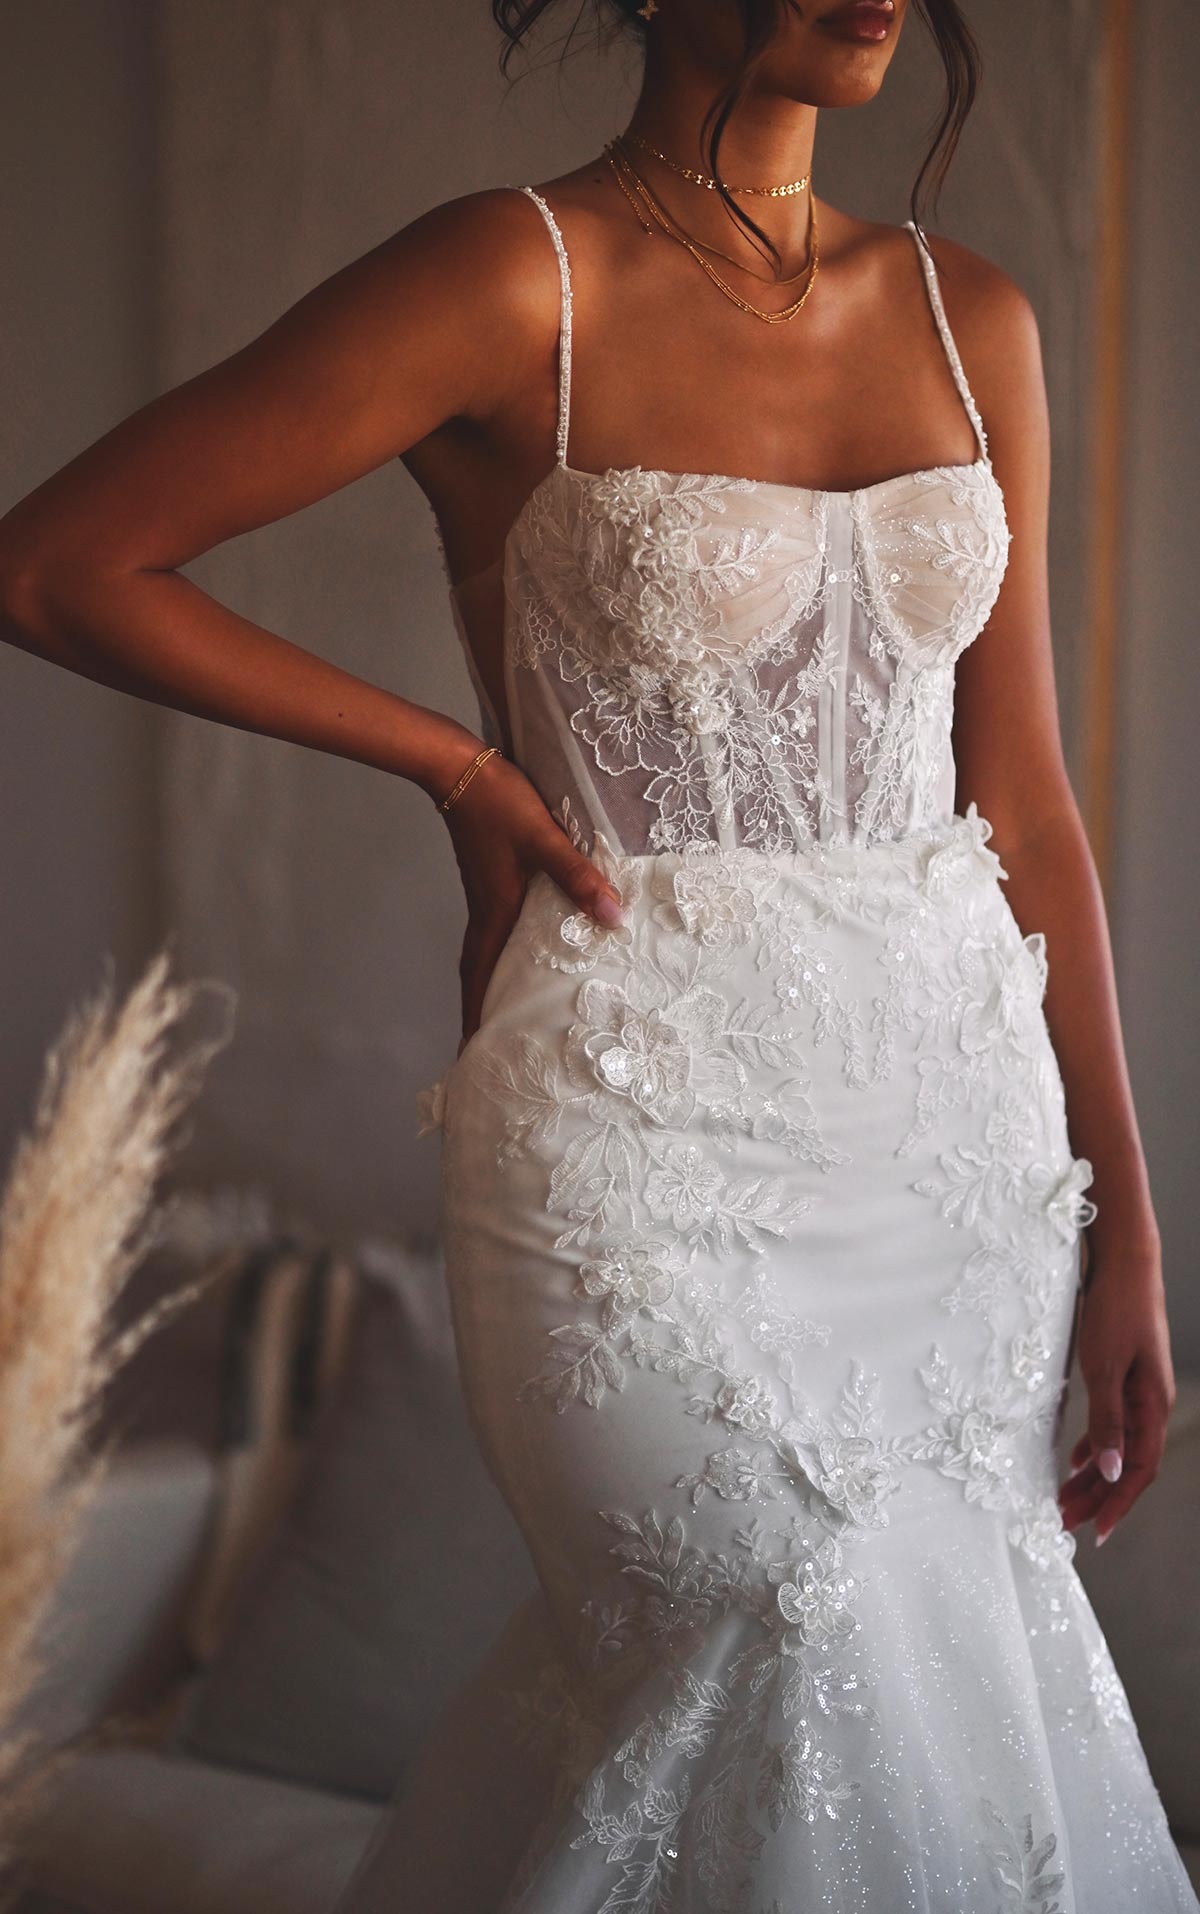 Selecting the Perfect Neckline for your Gown Dress